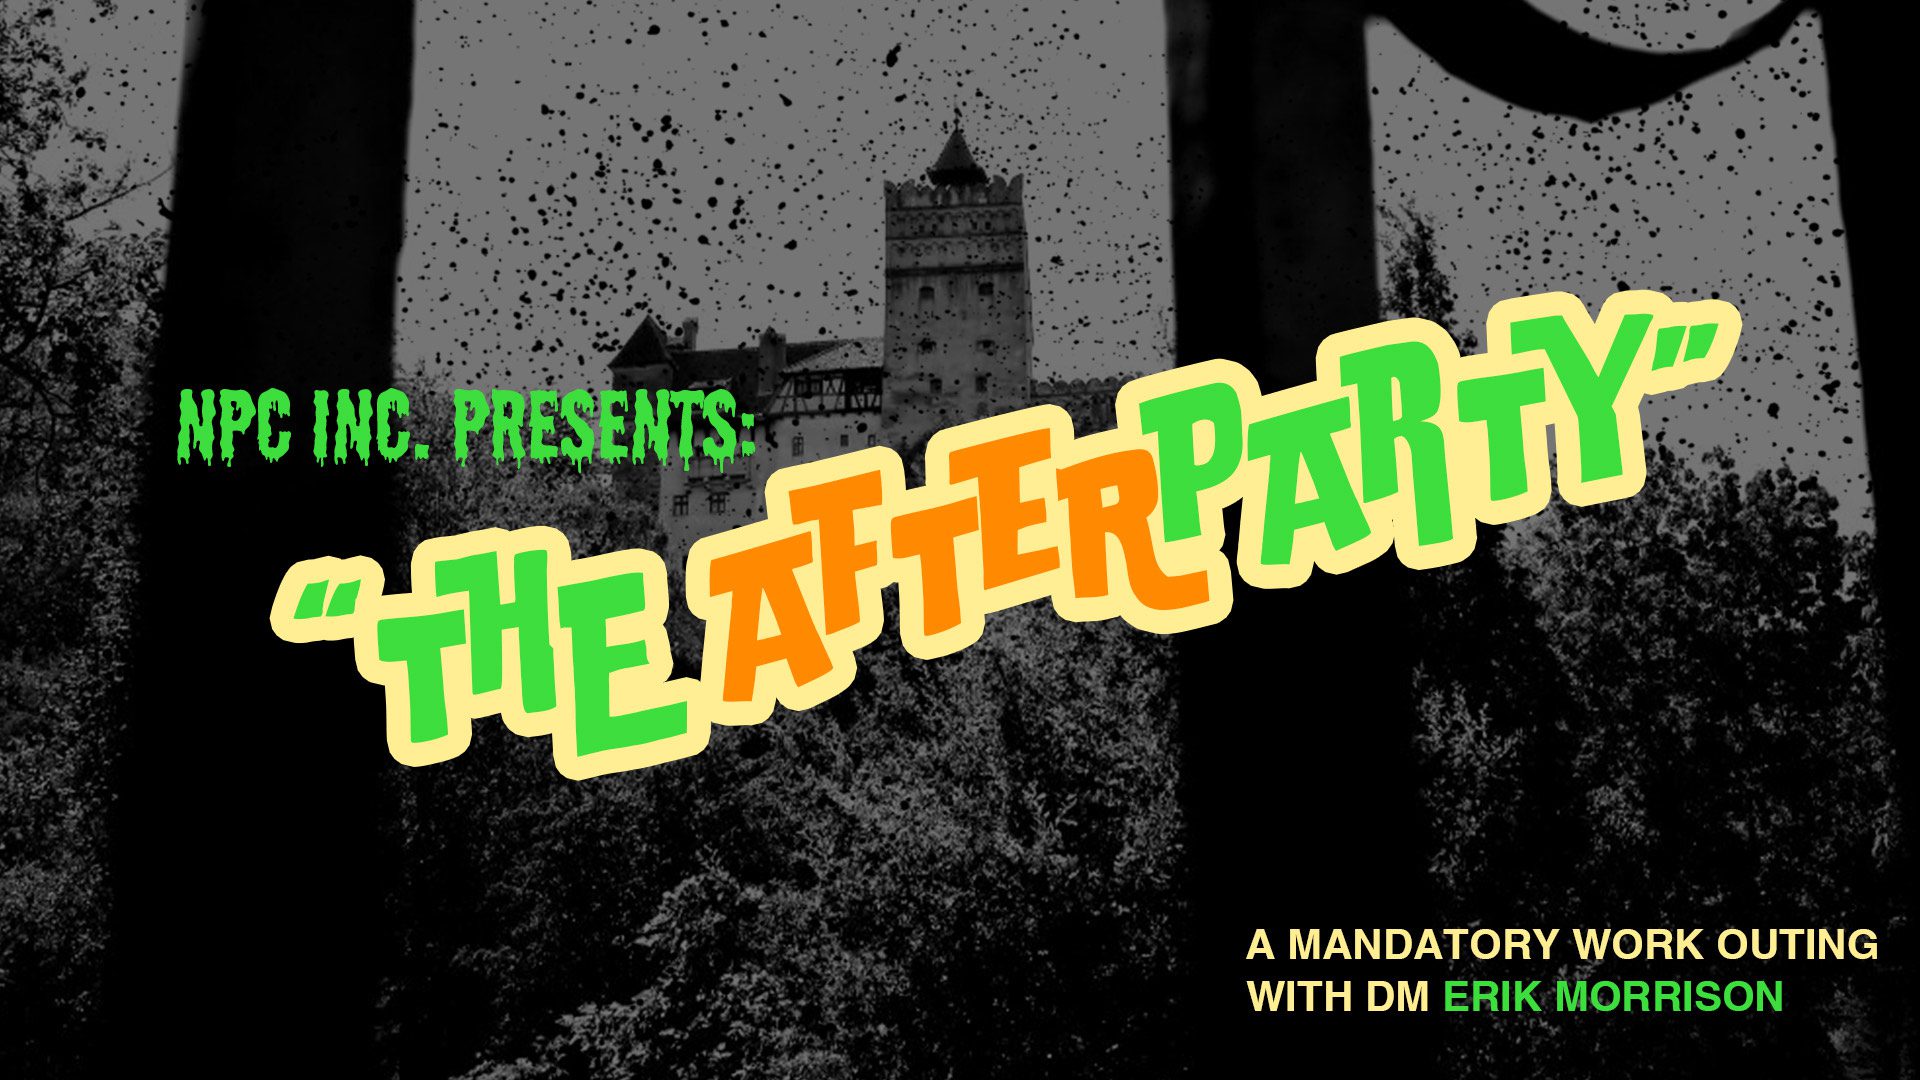 NPC INC. Presents: "The After Party" A mandatory work outing with DM Erik Morrison, on a black and white background of a castle with many bats